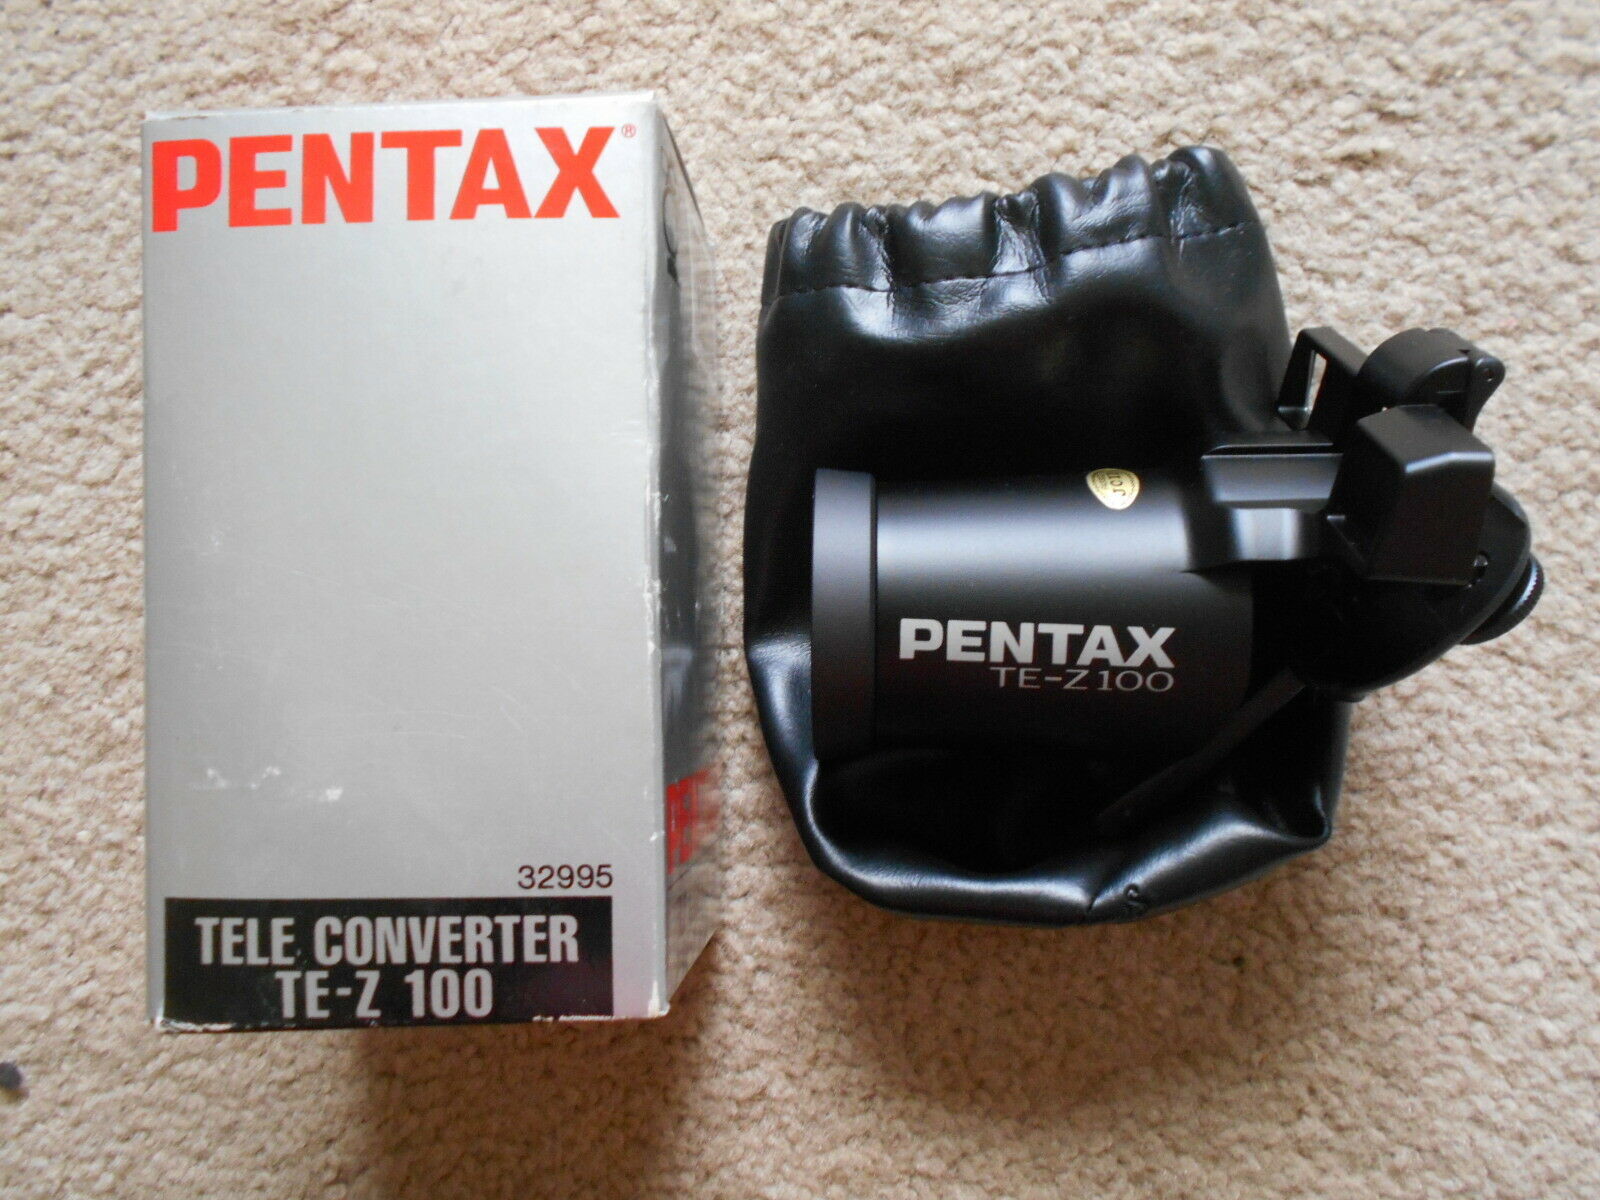 Pentax Tele Converter TE-Z 100 AT70mm only No.32995 - $17.81